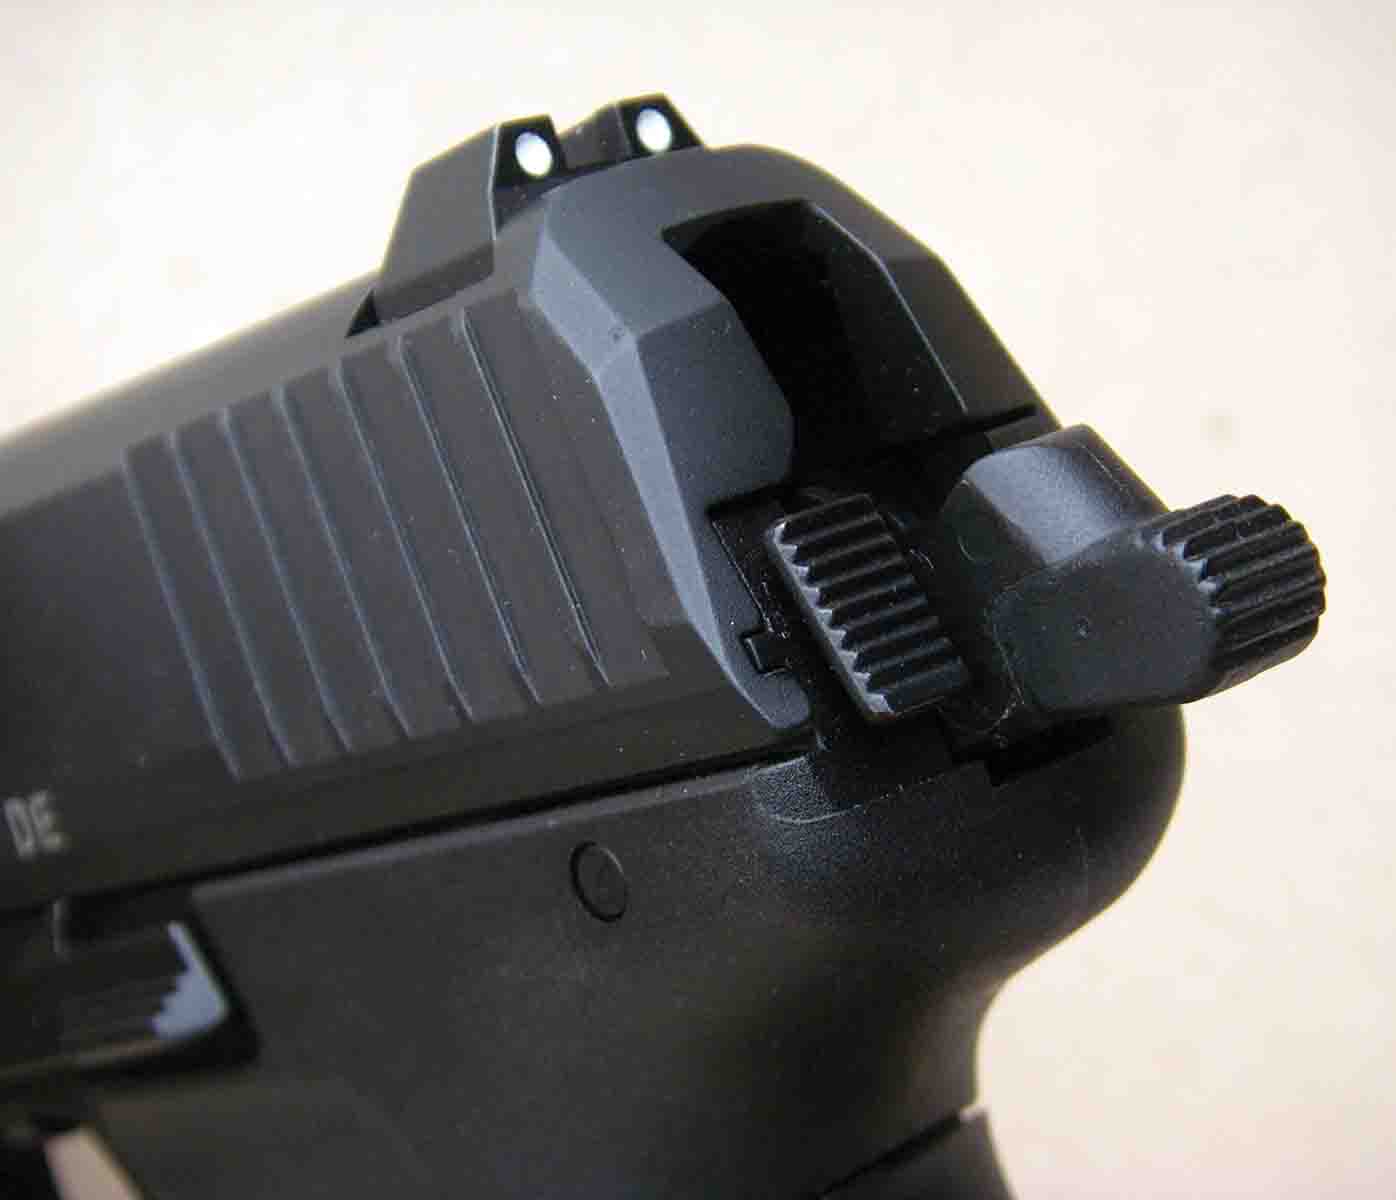 Robust sights are dovetailed into the slide and provide a three-dot system. The decocking button is located to the left of the hammer. Its location also serves to make the sides of the pistol snag free.